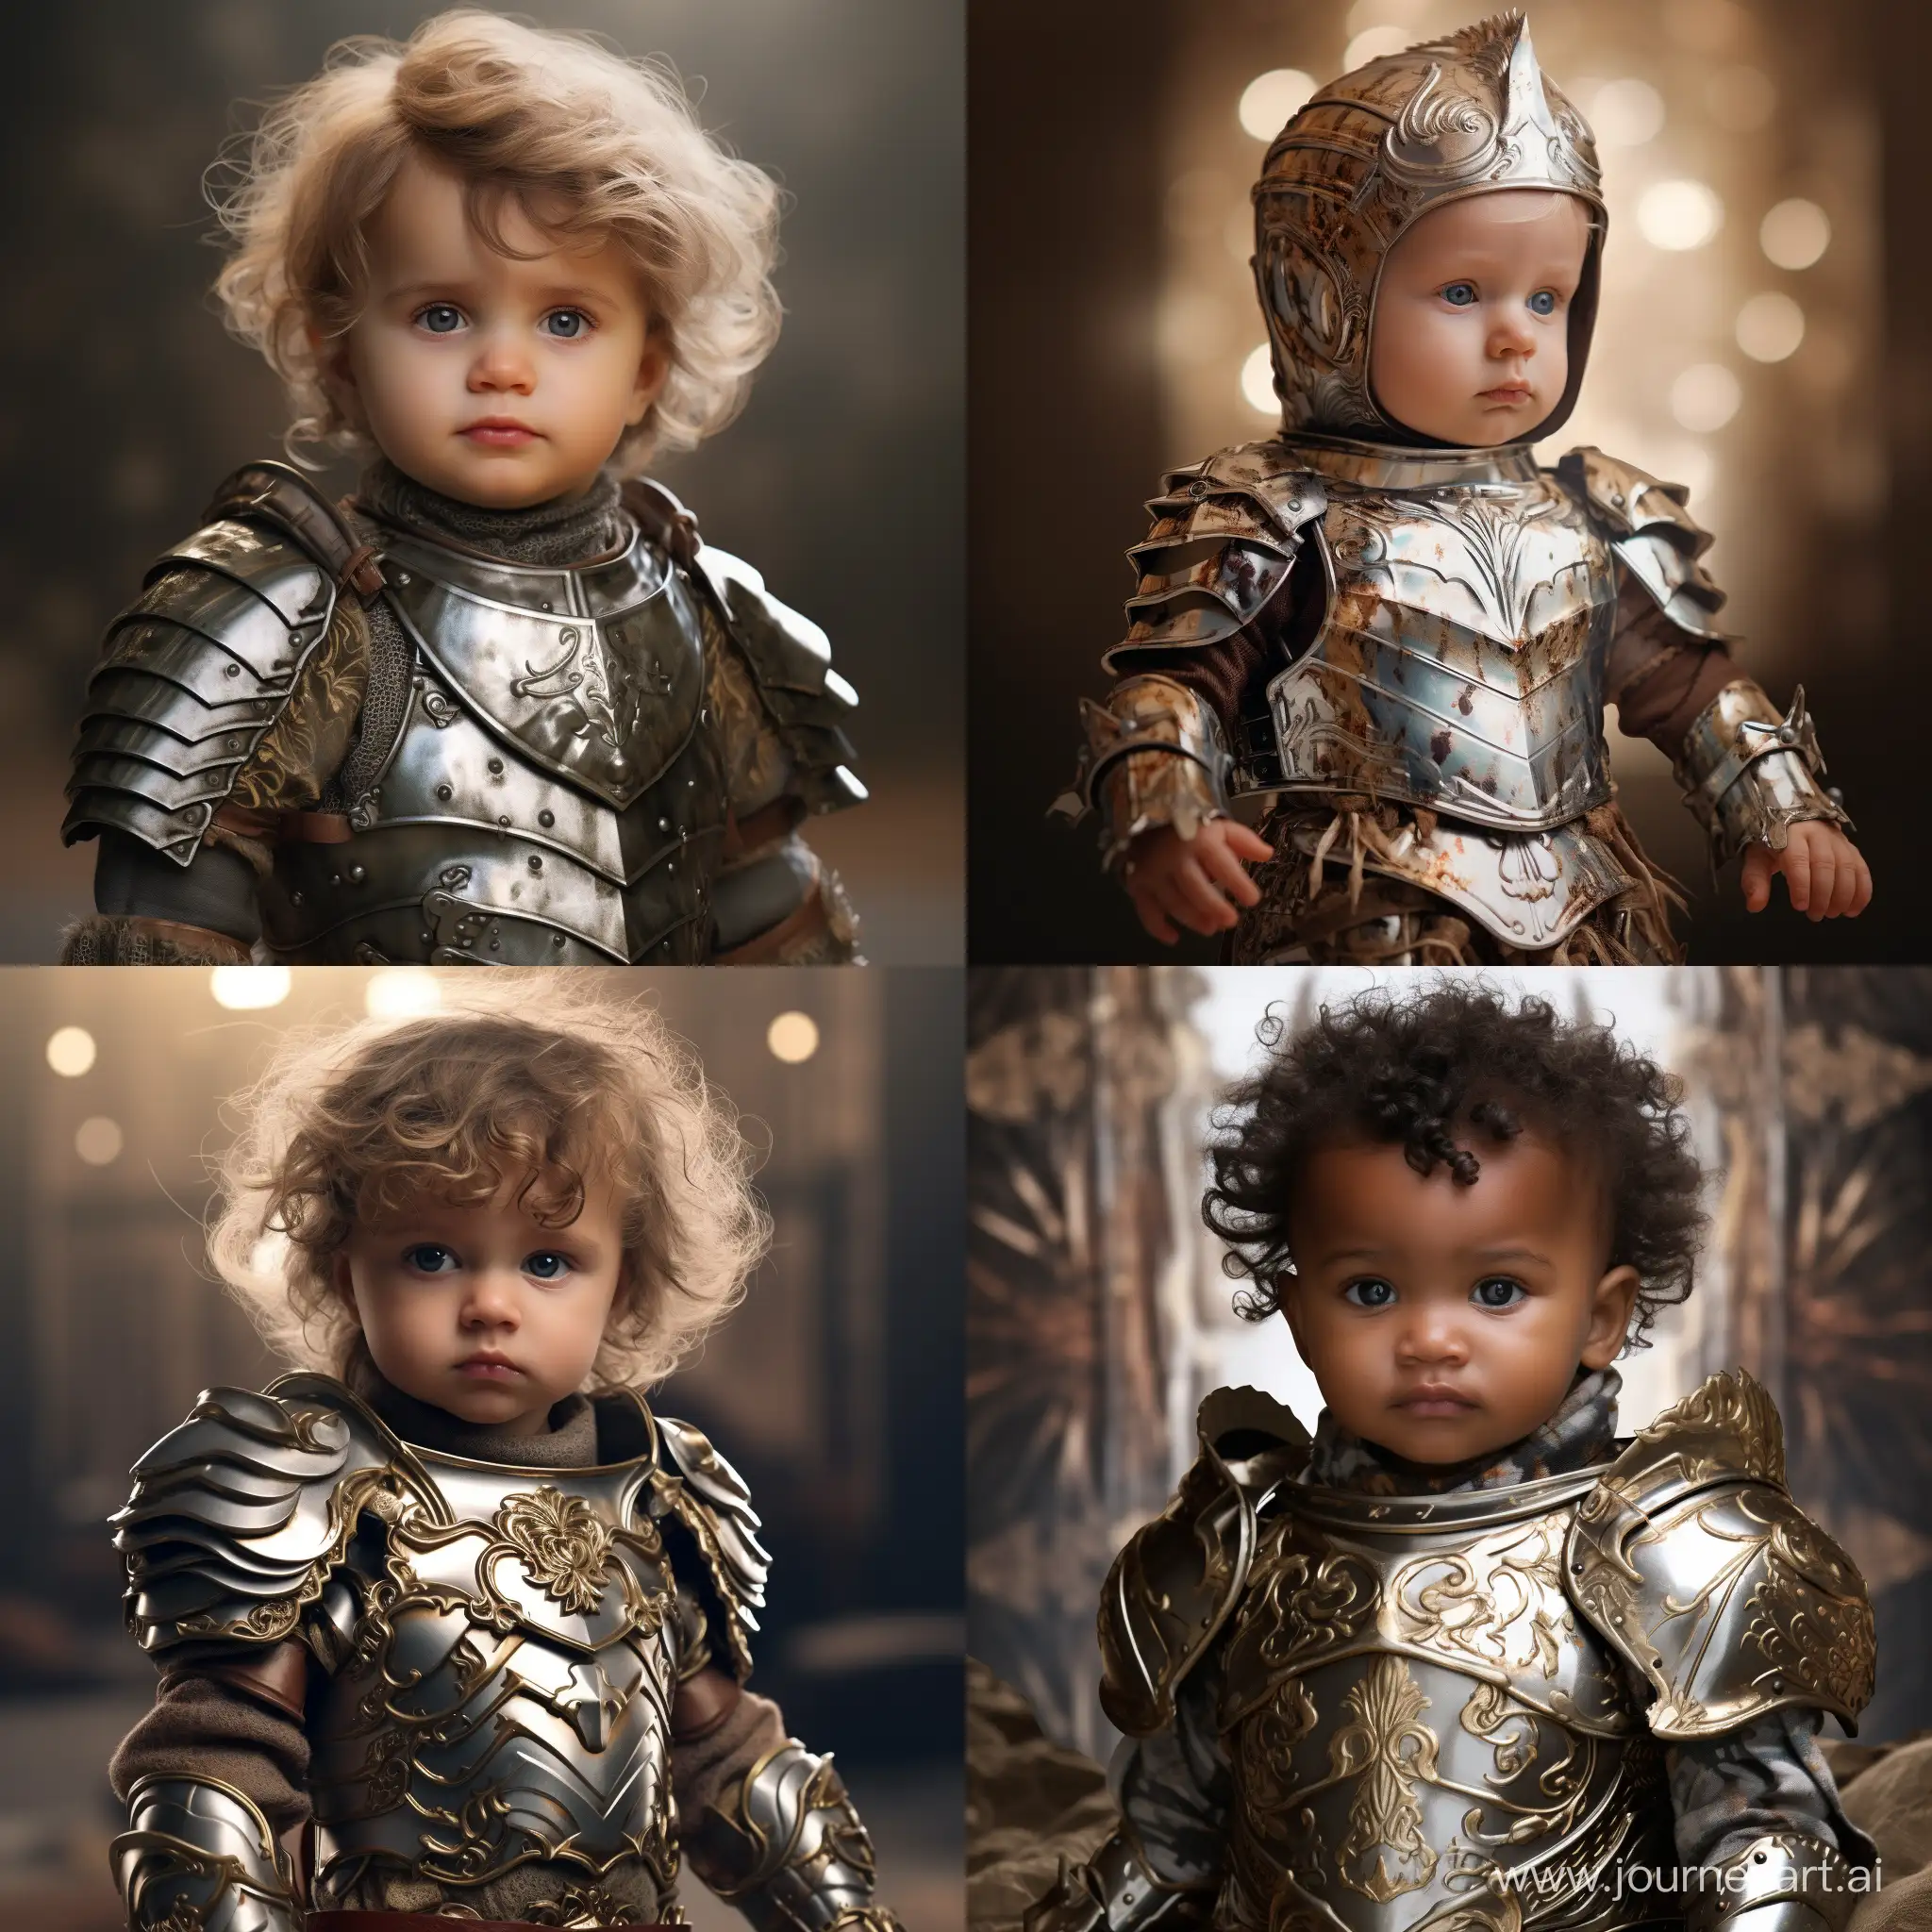 create a high fantasy character named Christian Baby.  He is wearing armor made out of christian babies